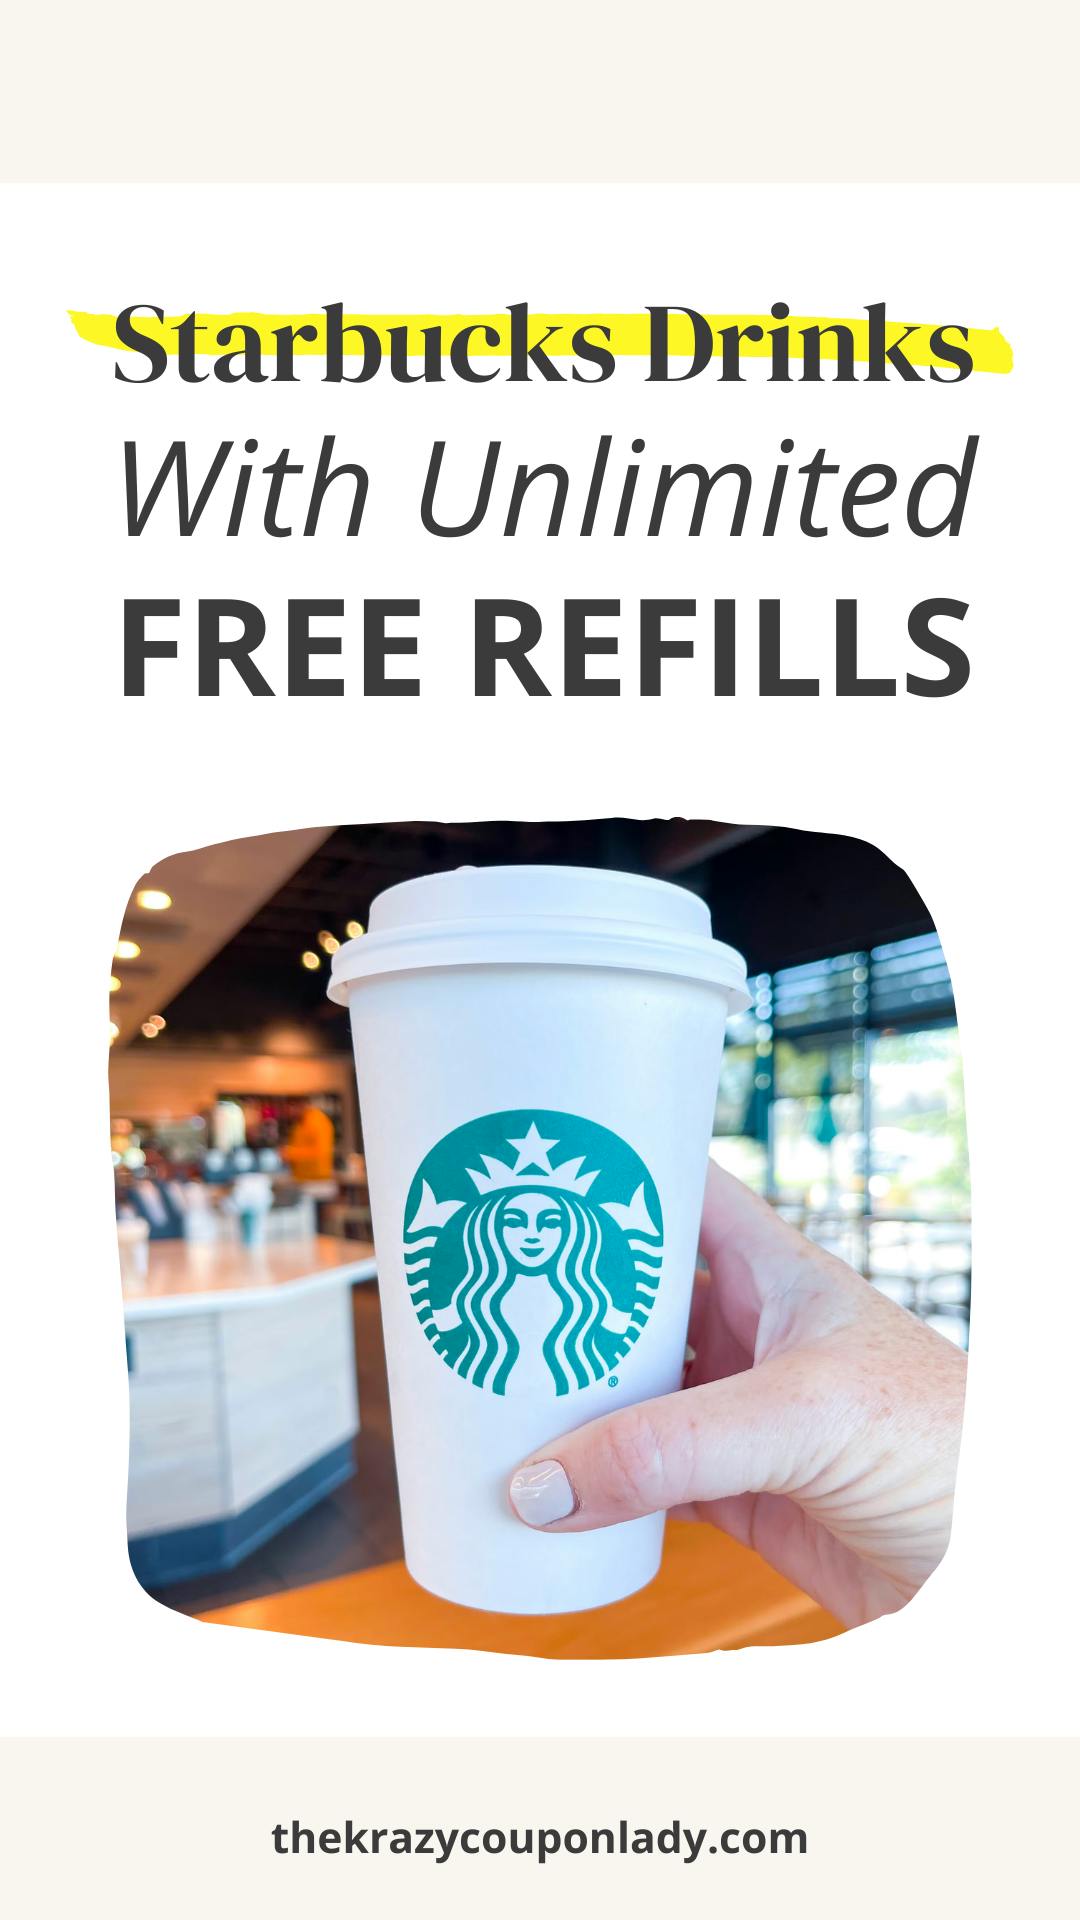 These Starbucks Drinks Come With Unlimited Free Refills